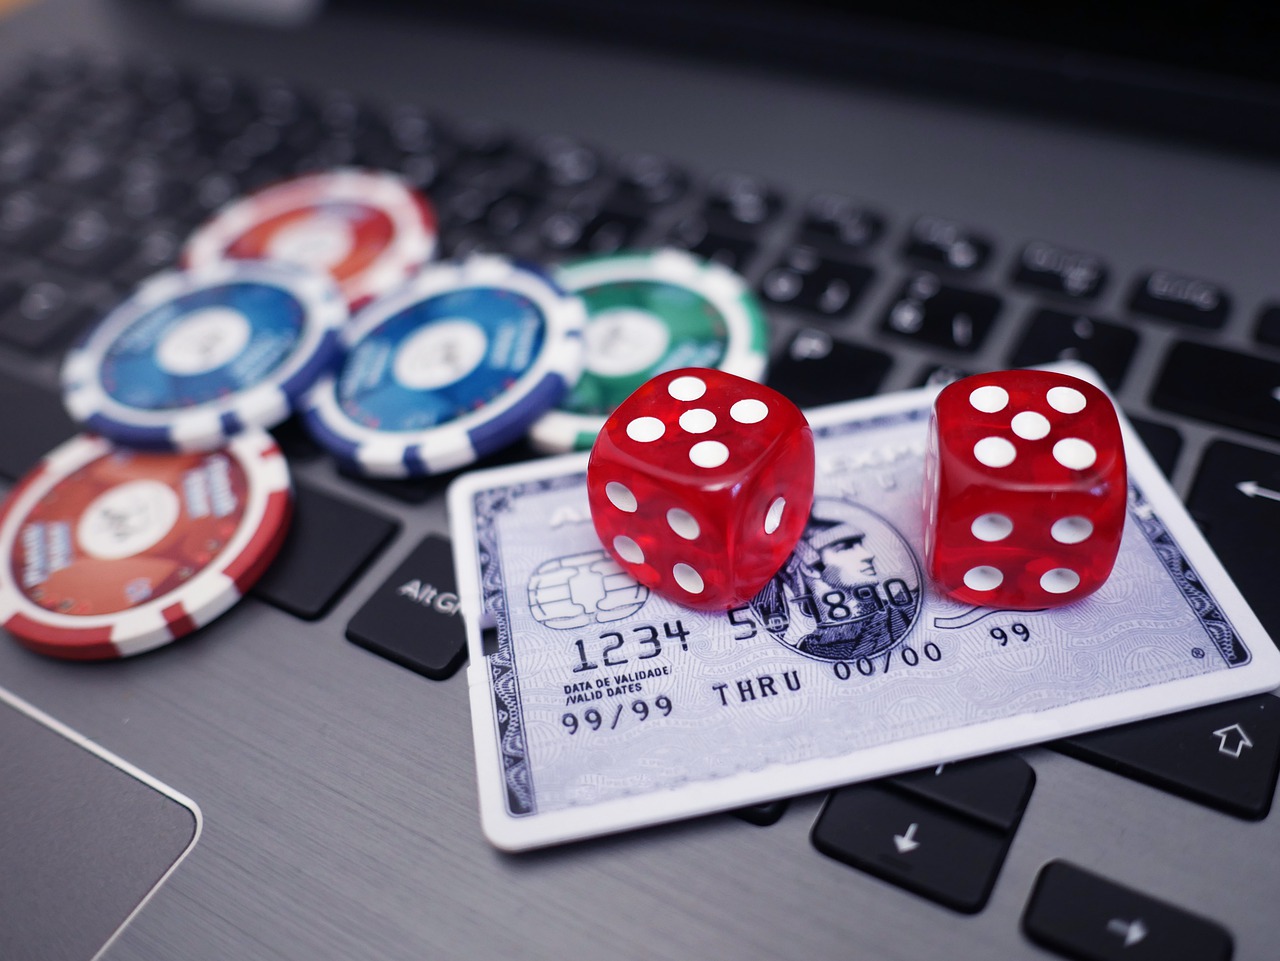 Mastering The Way Of play online casino Is Not An Accident - It's An Art